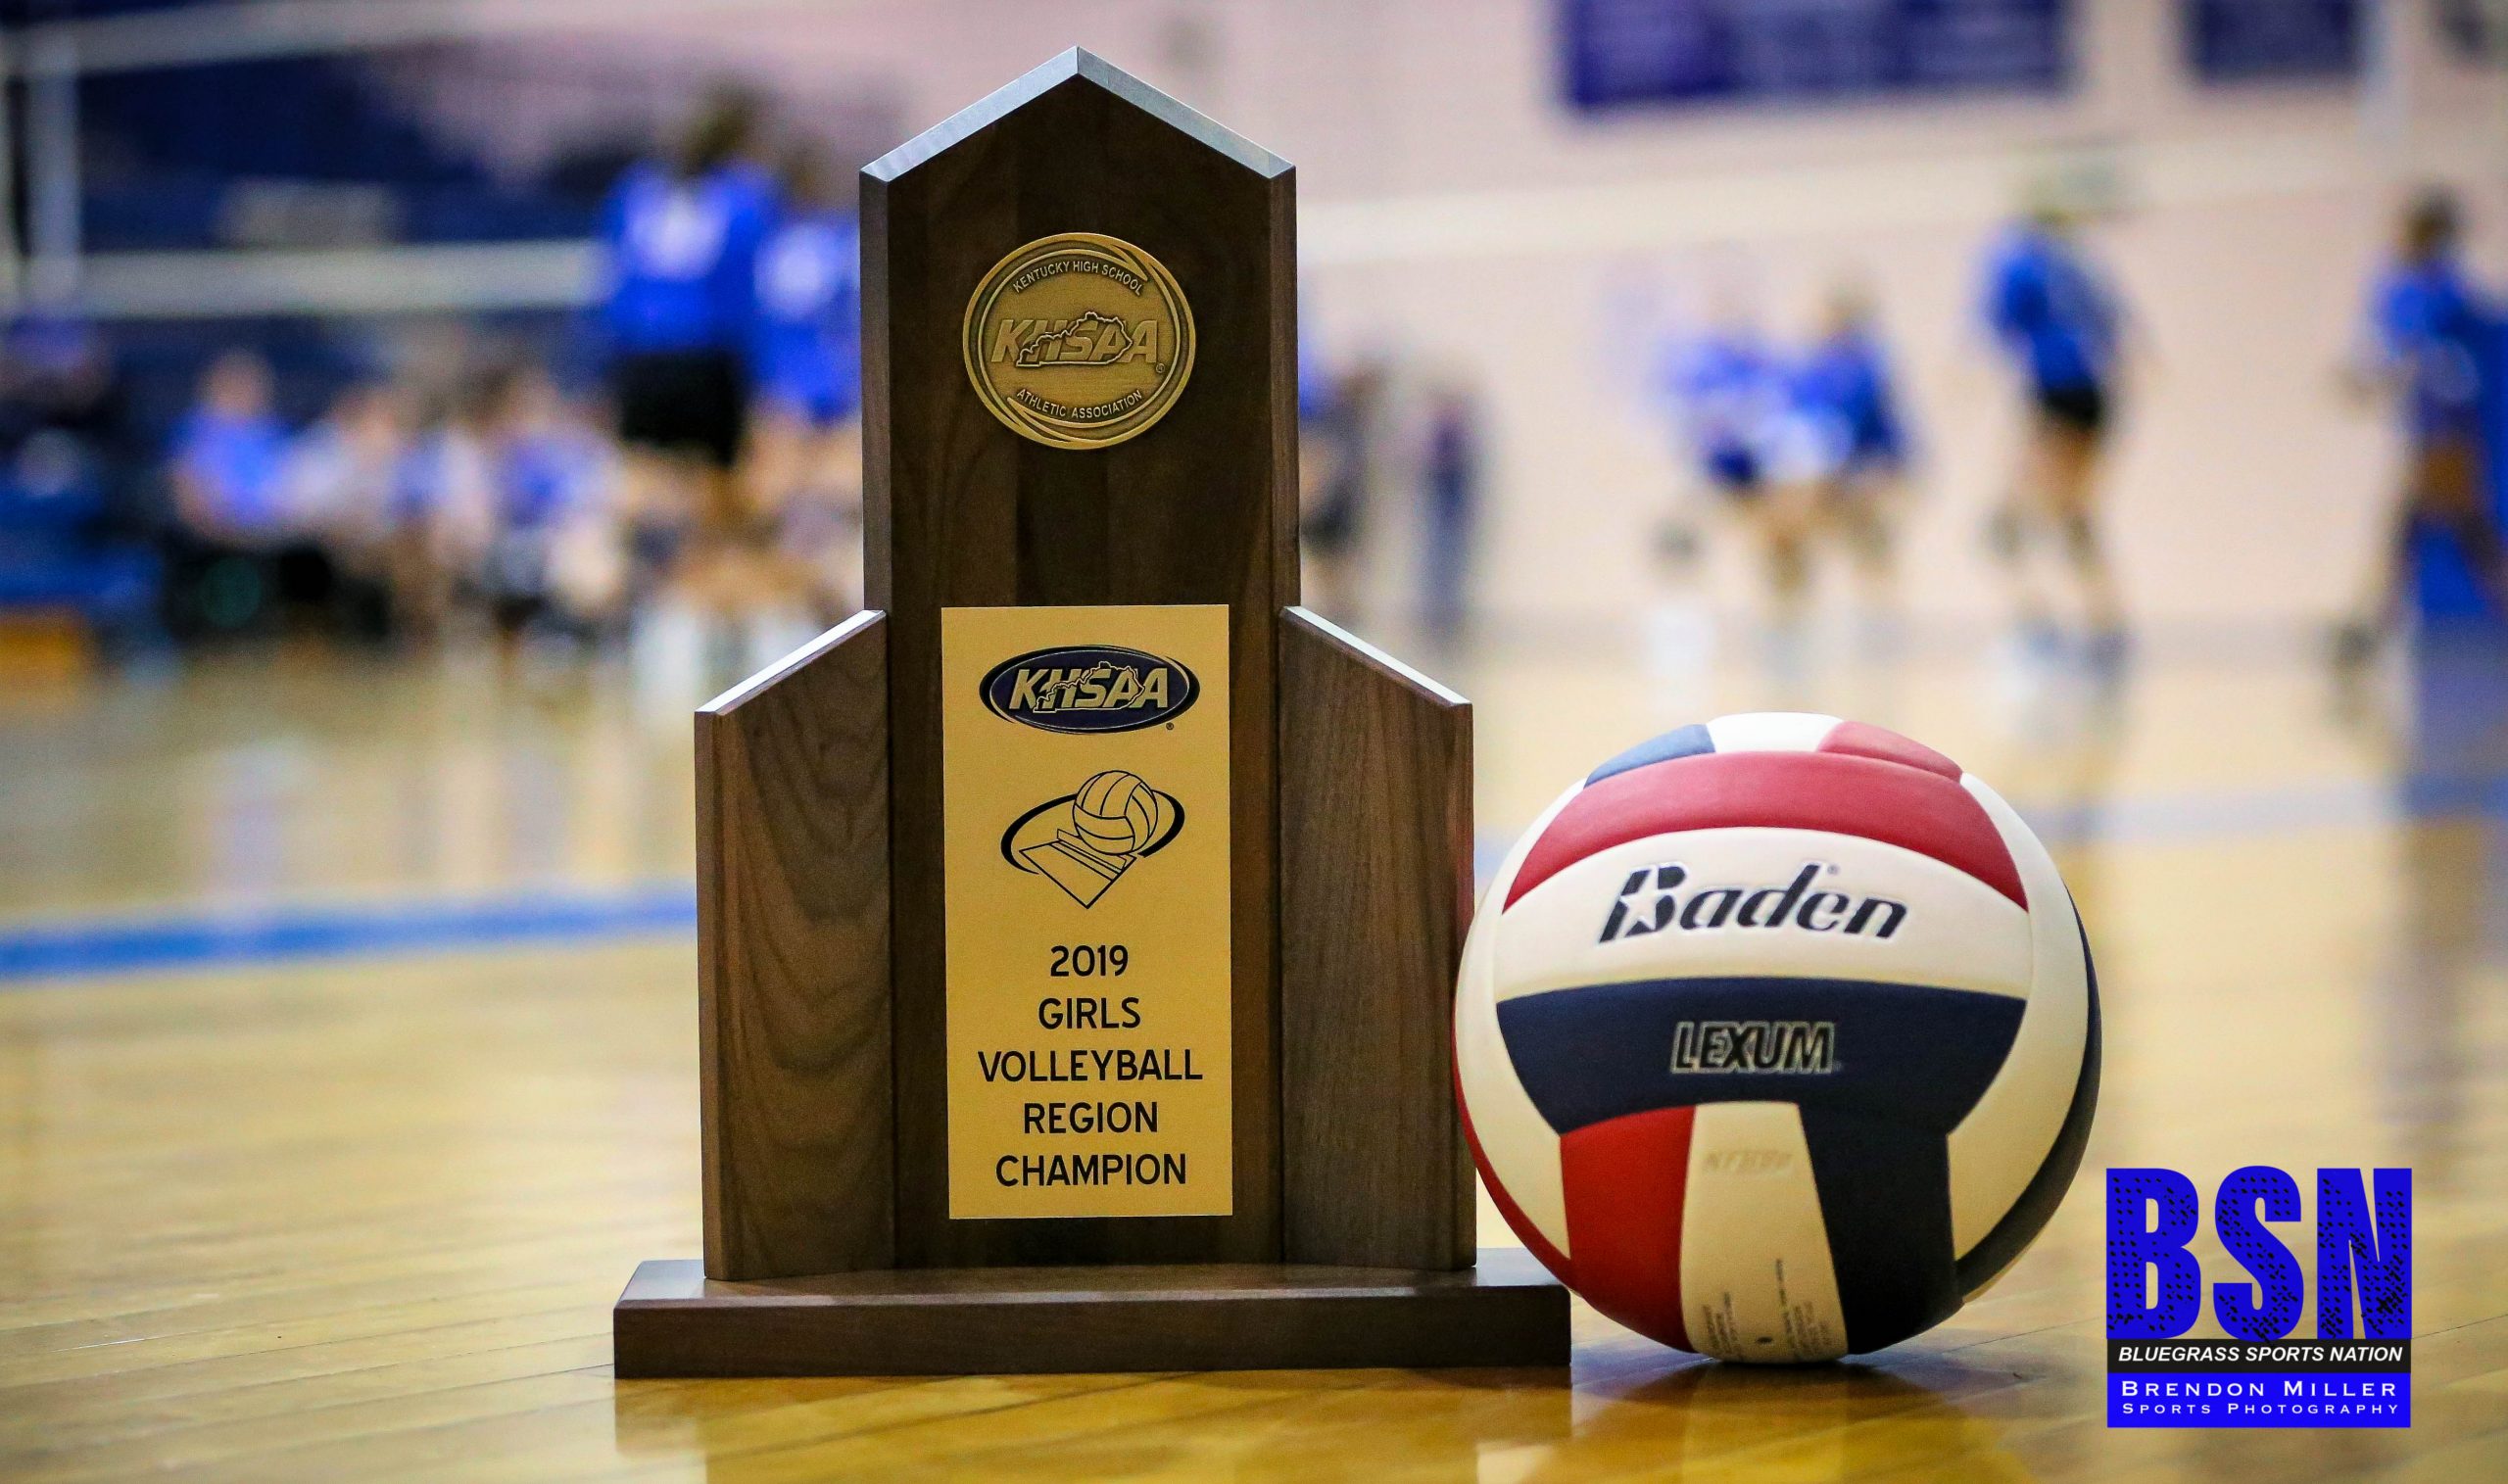 55th District Volleyball Tournament – LIVE on BSN!